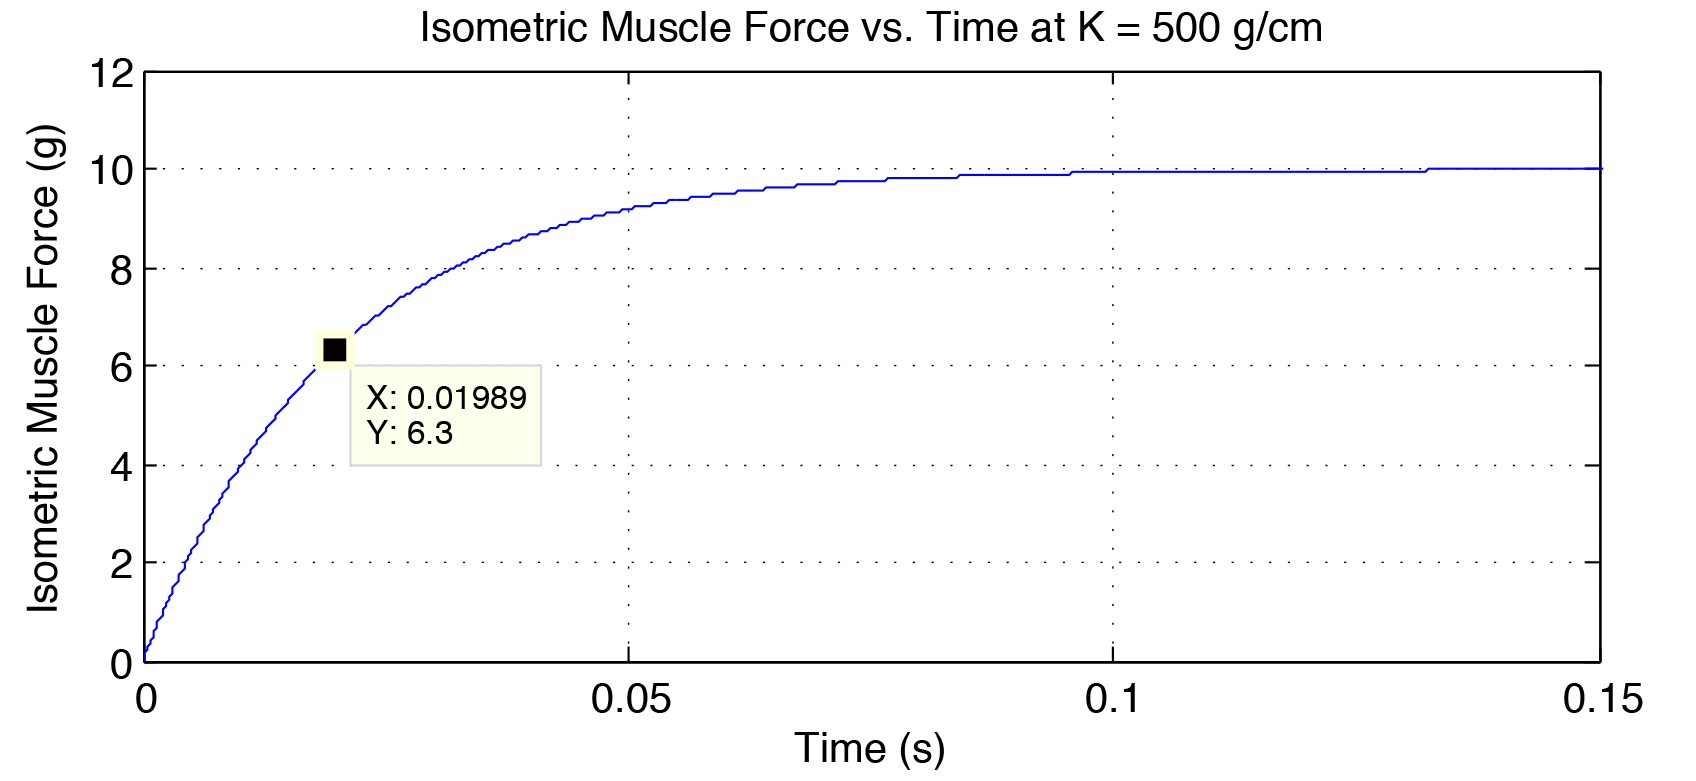 Hill Model Simulation and Functional Electrical Stimulation